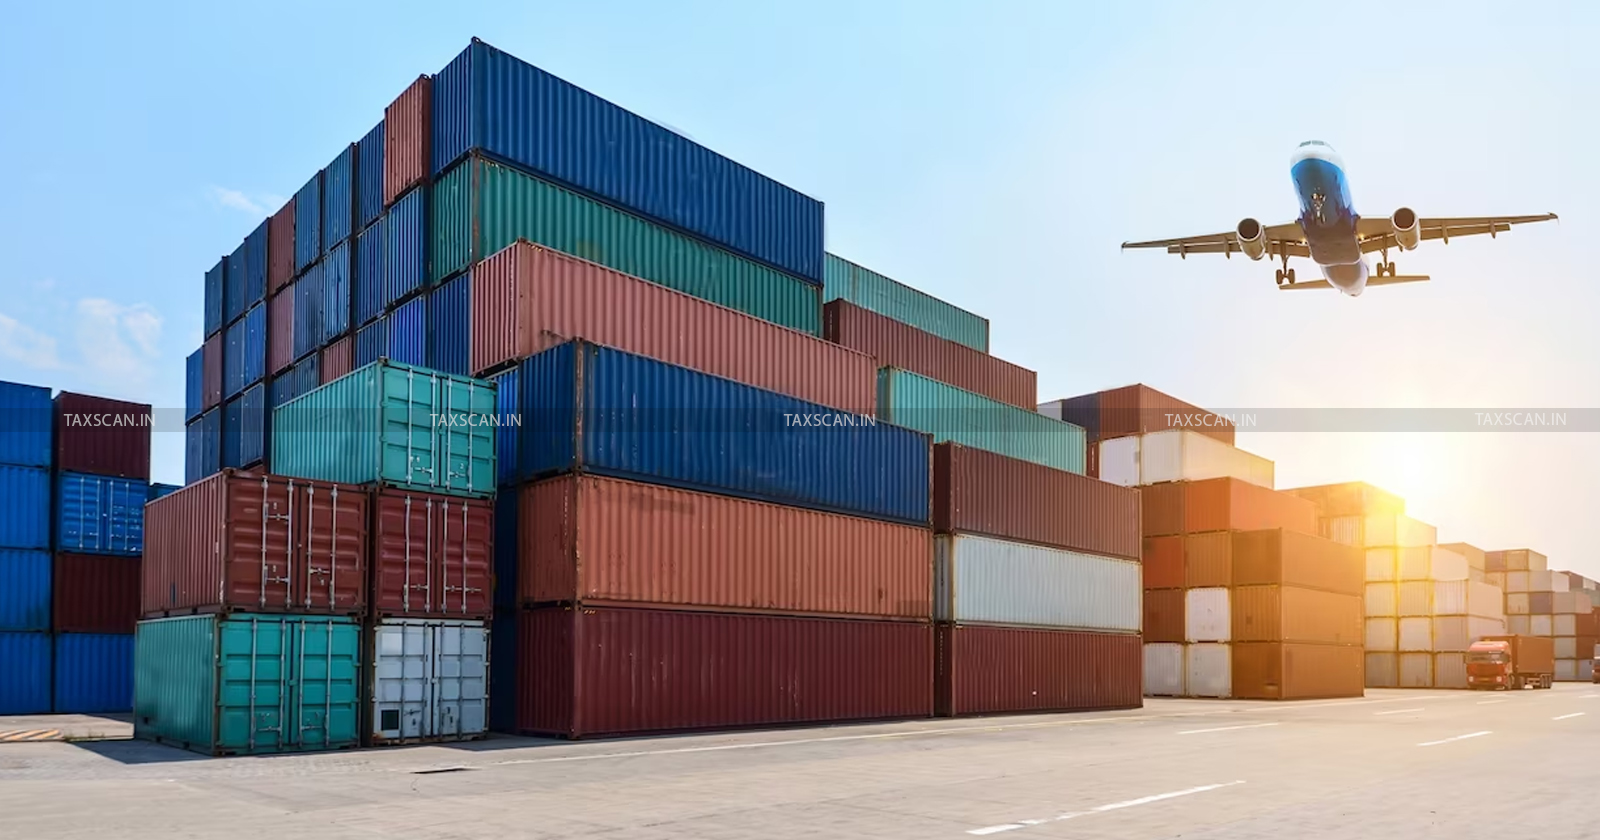 Freight forwarding Services Consumes Inside SEZ - Service Tax Exemption under Exemption Notification - CESTAT -Freight forwarding Services - Exemption Notification -taxscan